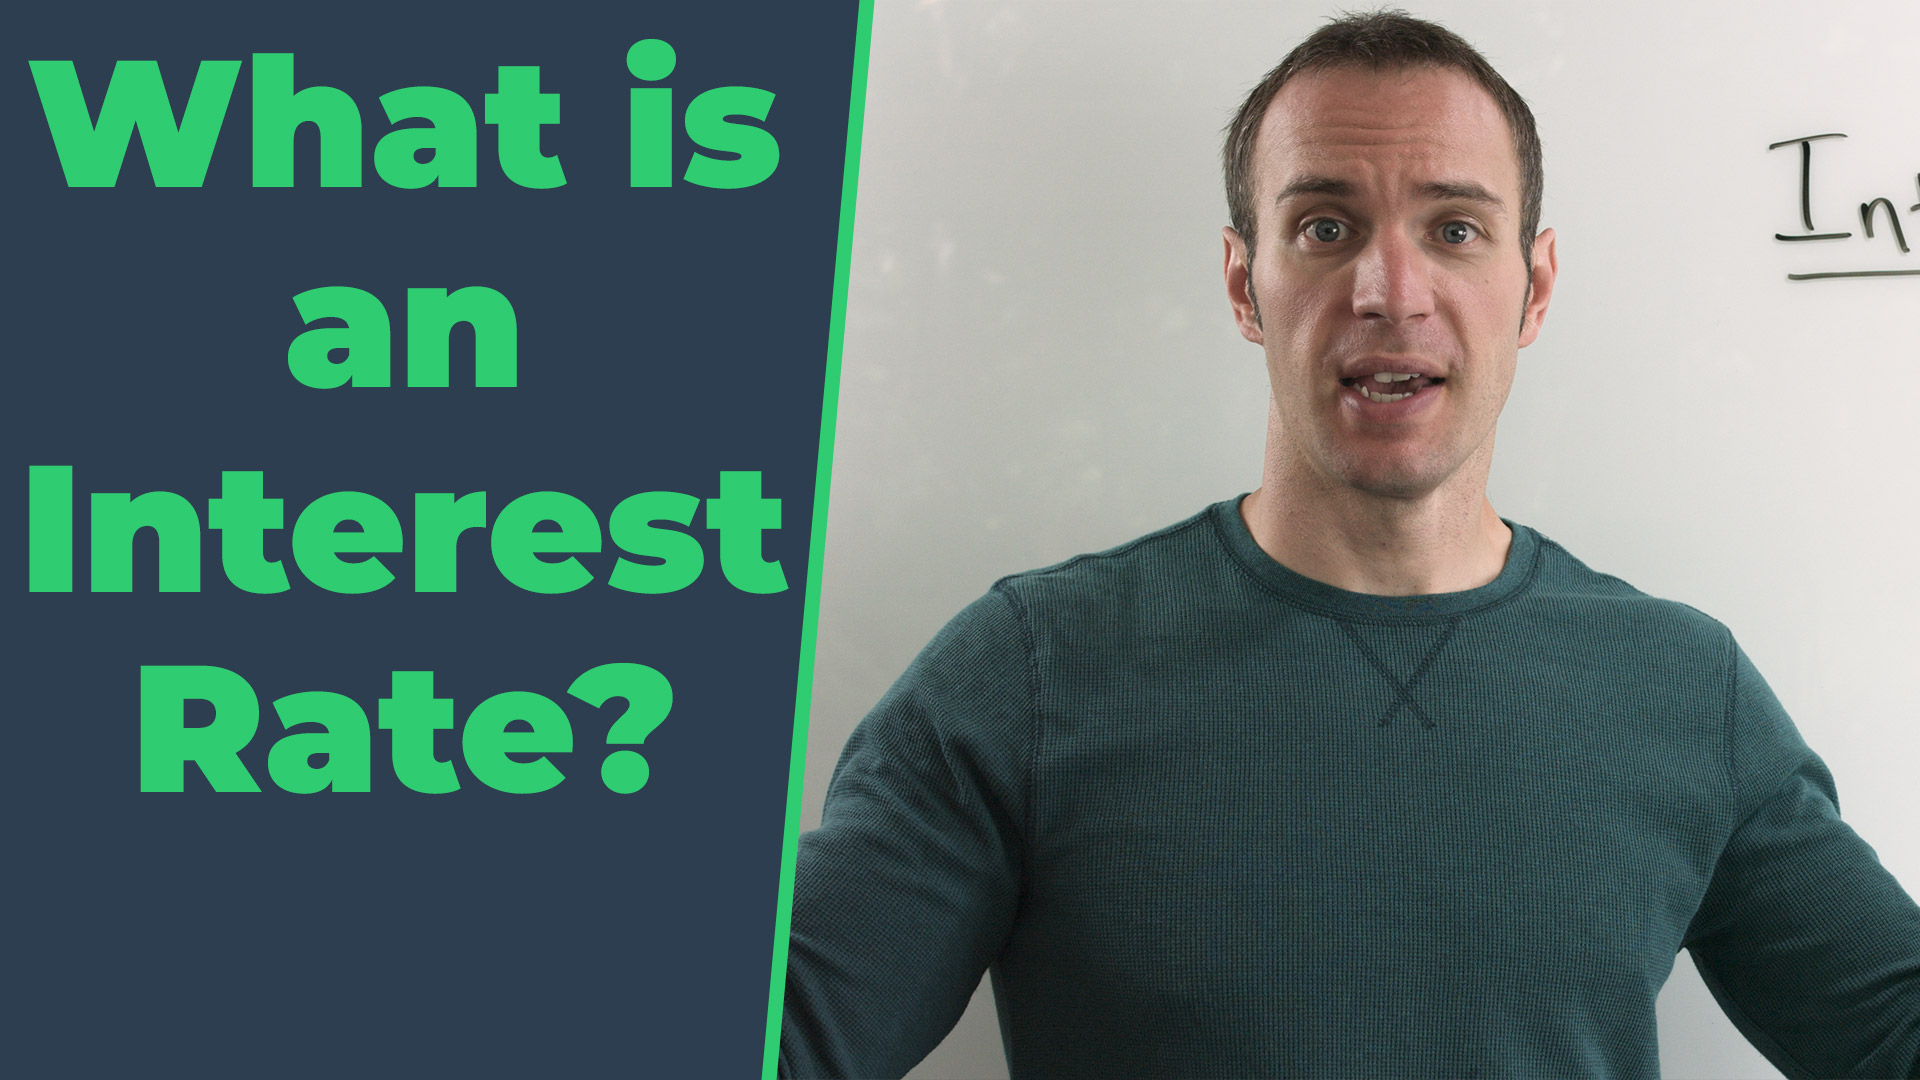 What is an Interest Rate?